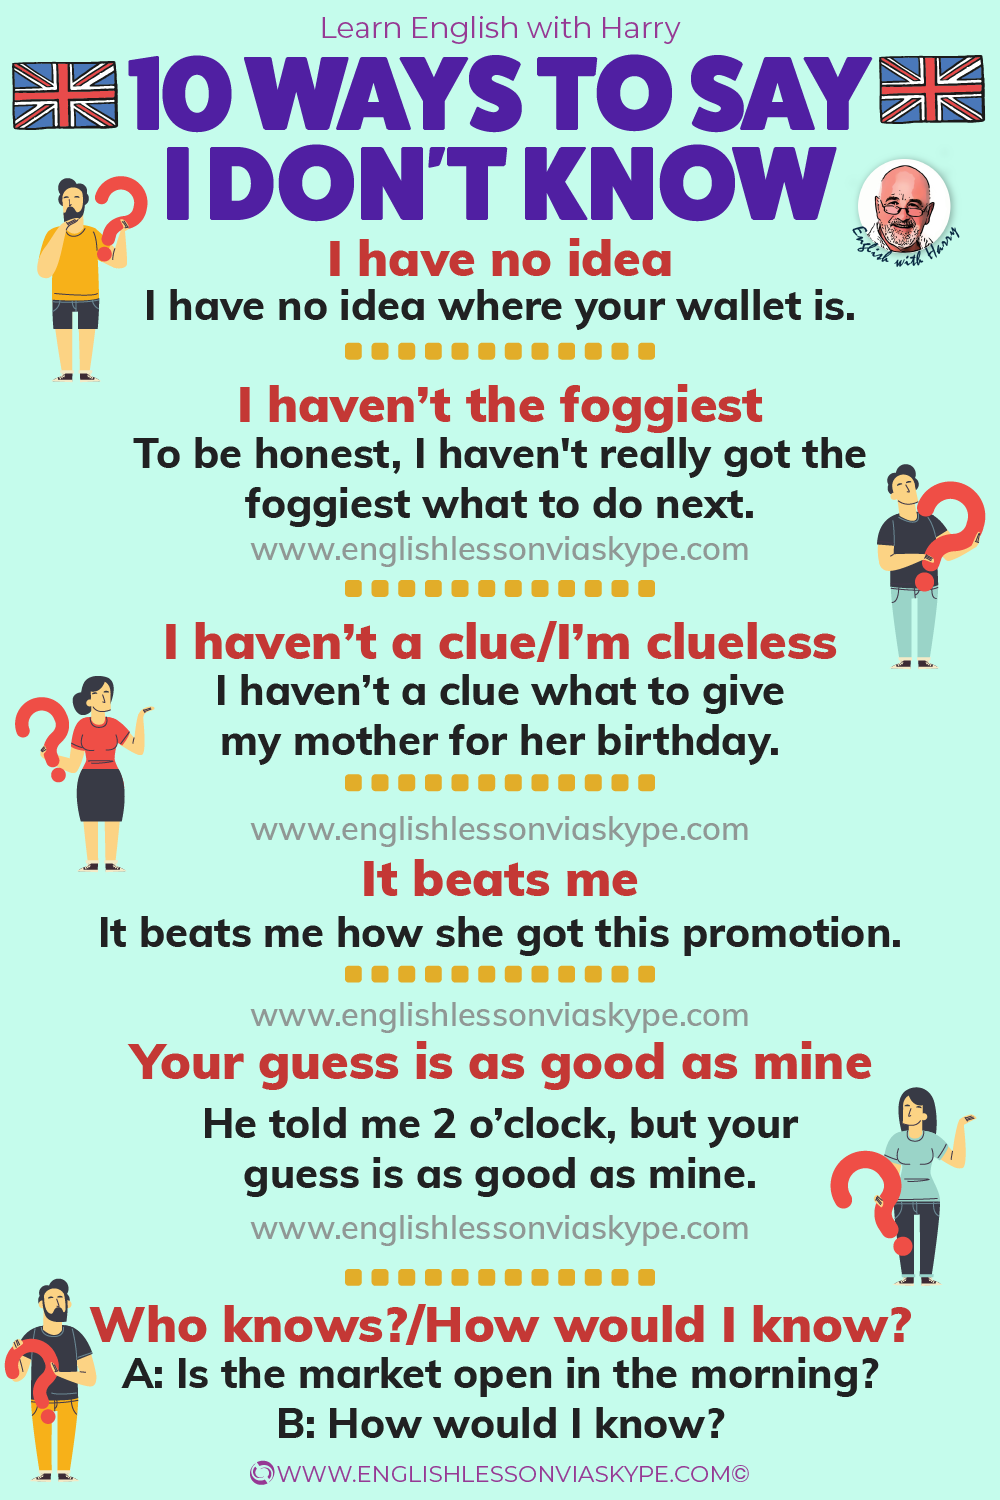 English Vocabulary: 10 Ways to say I don't know in English. From intermediate to advanced English with www.englishlessonviaskype.com #learnenglish #englishlessons #EnglishTeacher #vocabulary #ingles #อังกฤษ #английский #aprenderingles #english #cursodeingles #учианглийский #vocabulário #dicasdeingles #learningenglish #ingilizce #englishgrammar #englishvocabulary #ielts #idiomas